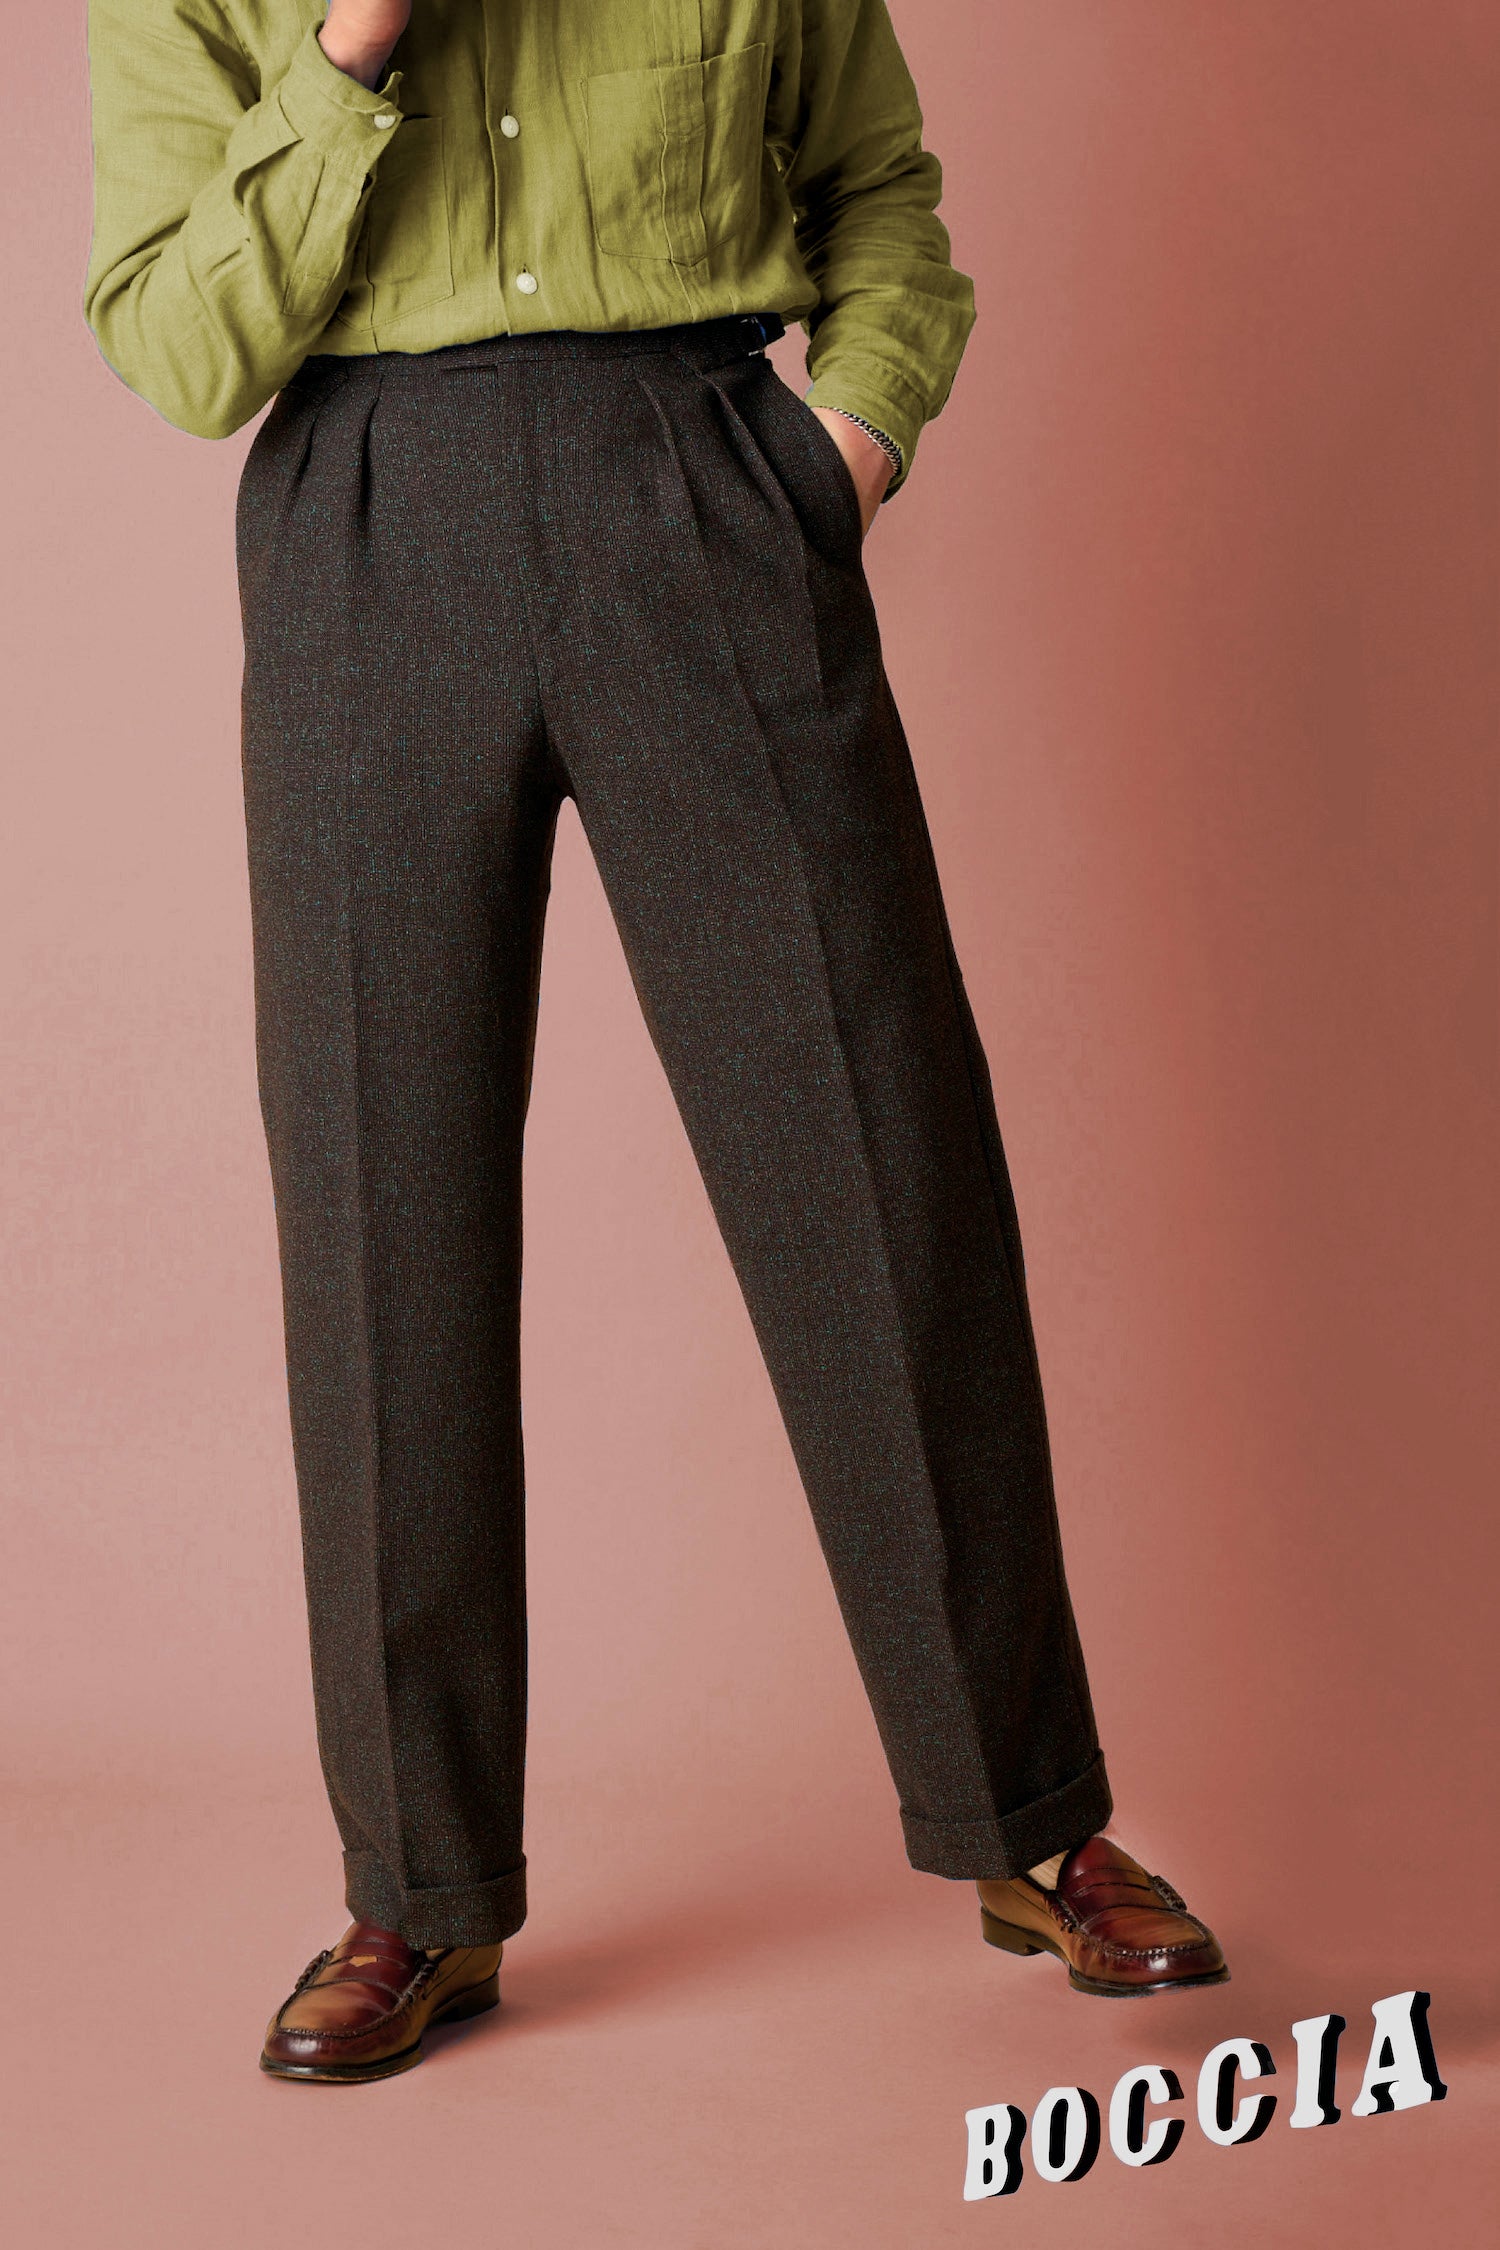 ASOS Woven Peg Trousers with OBI Tie | ASOS | Red trousers outfit, Red pants  outfit, High waisted pants outfit